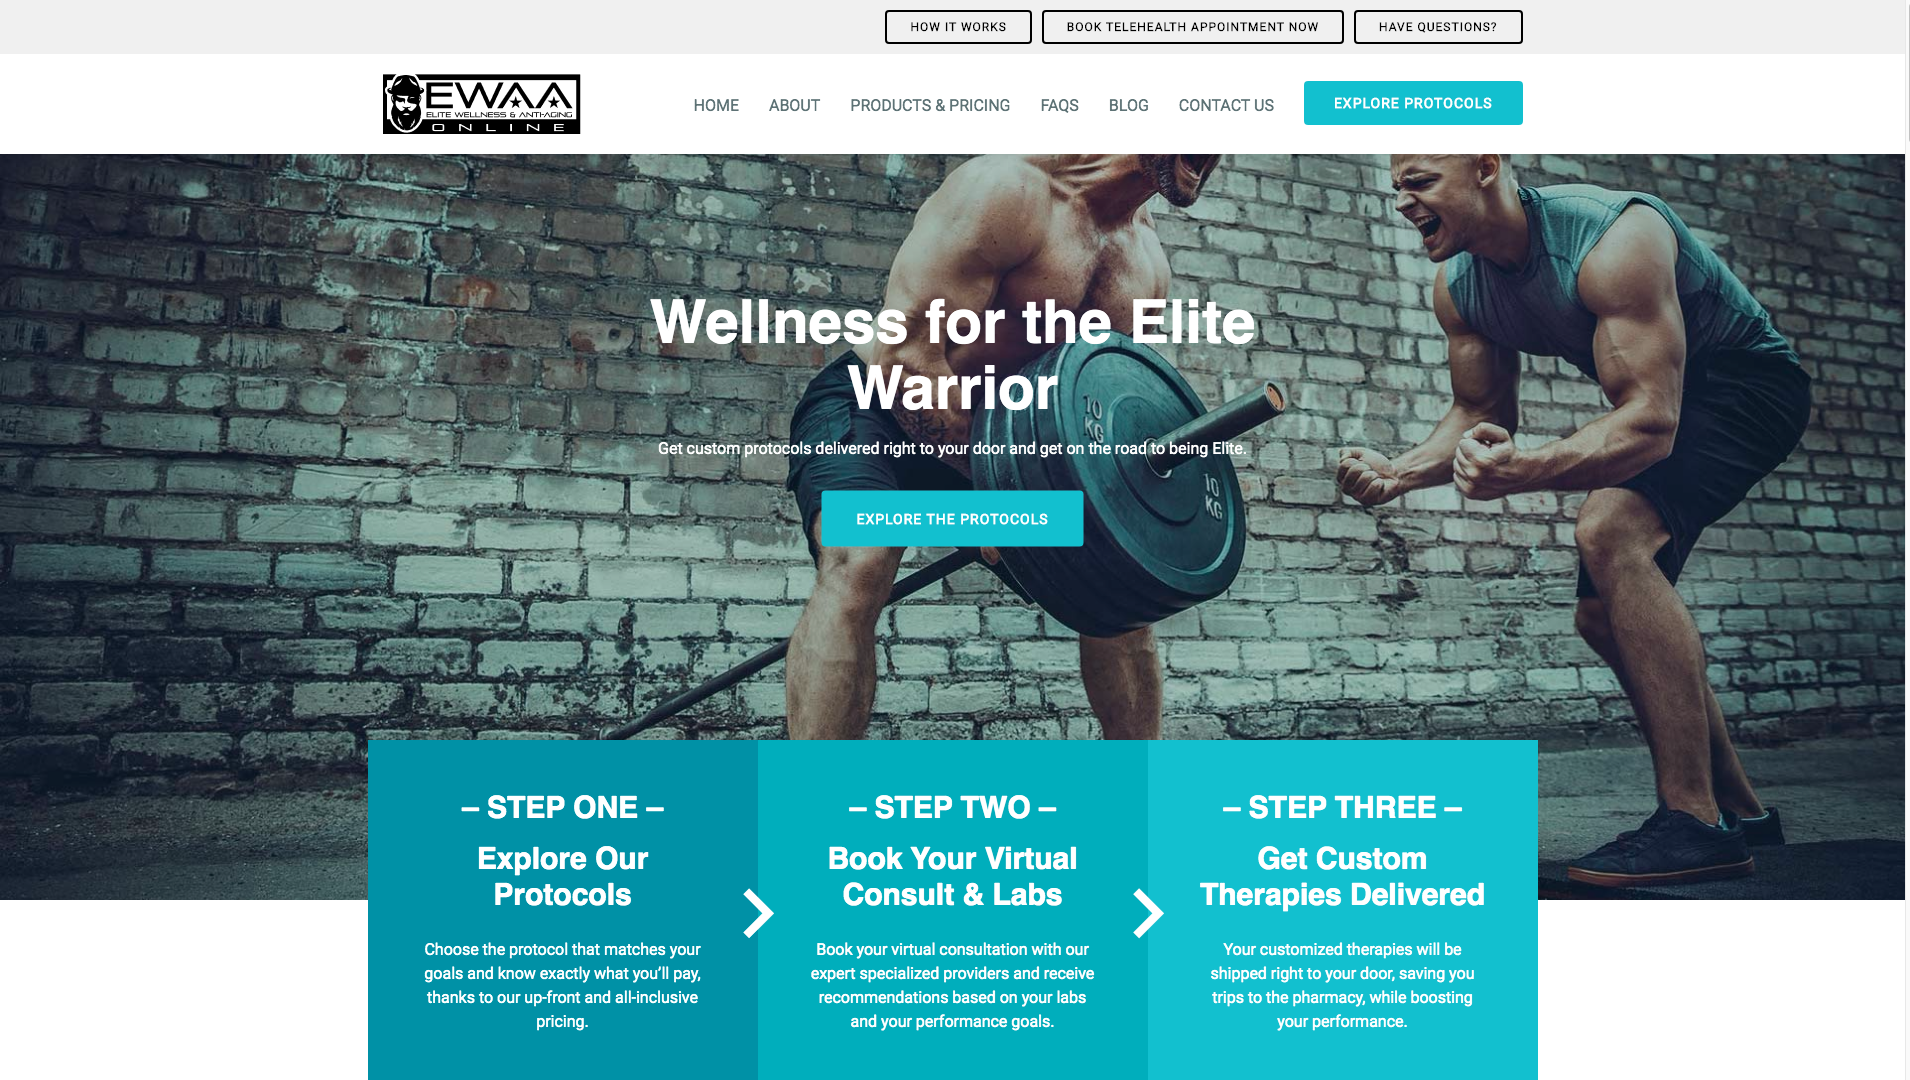 Elite Health Online is Attracting a New Generation of Health Conscious People